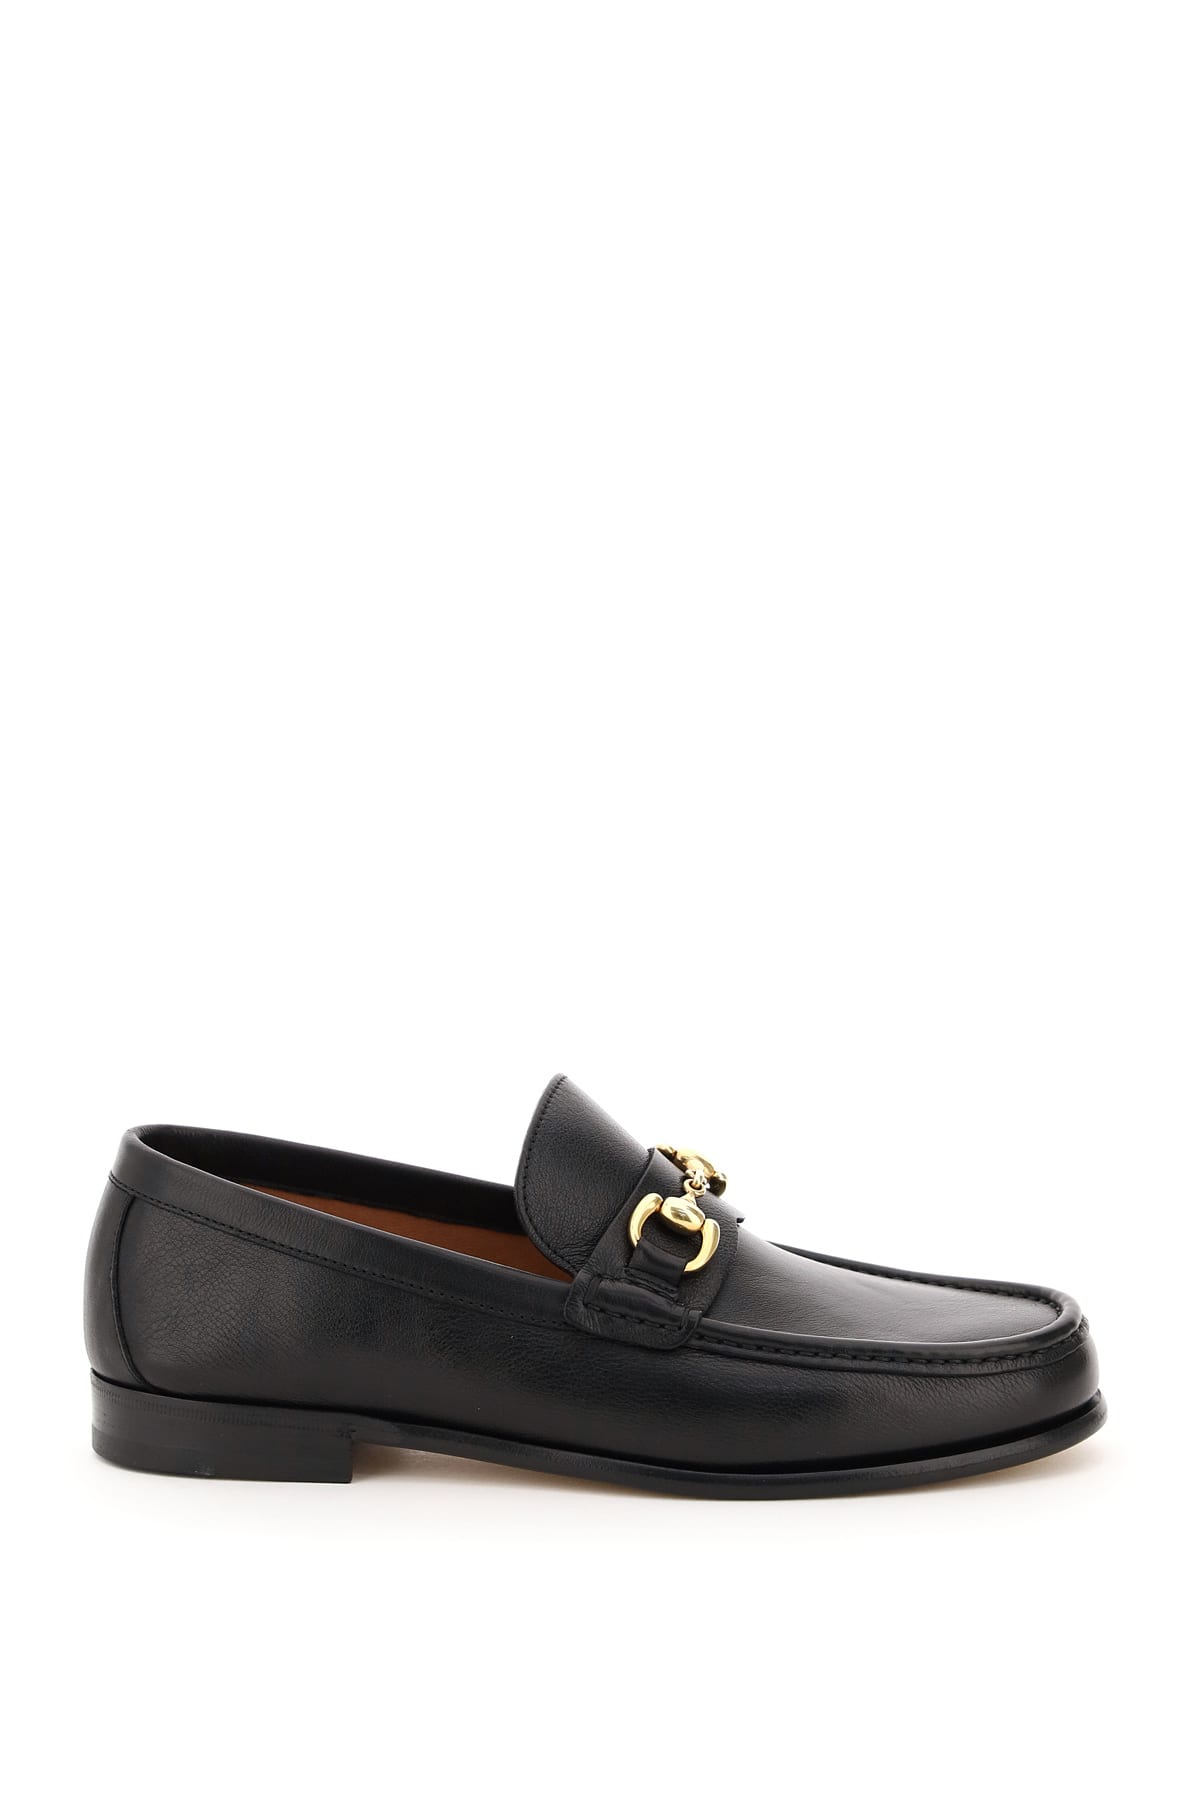 Henderson Baracco Orfeo Leather Loafers